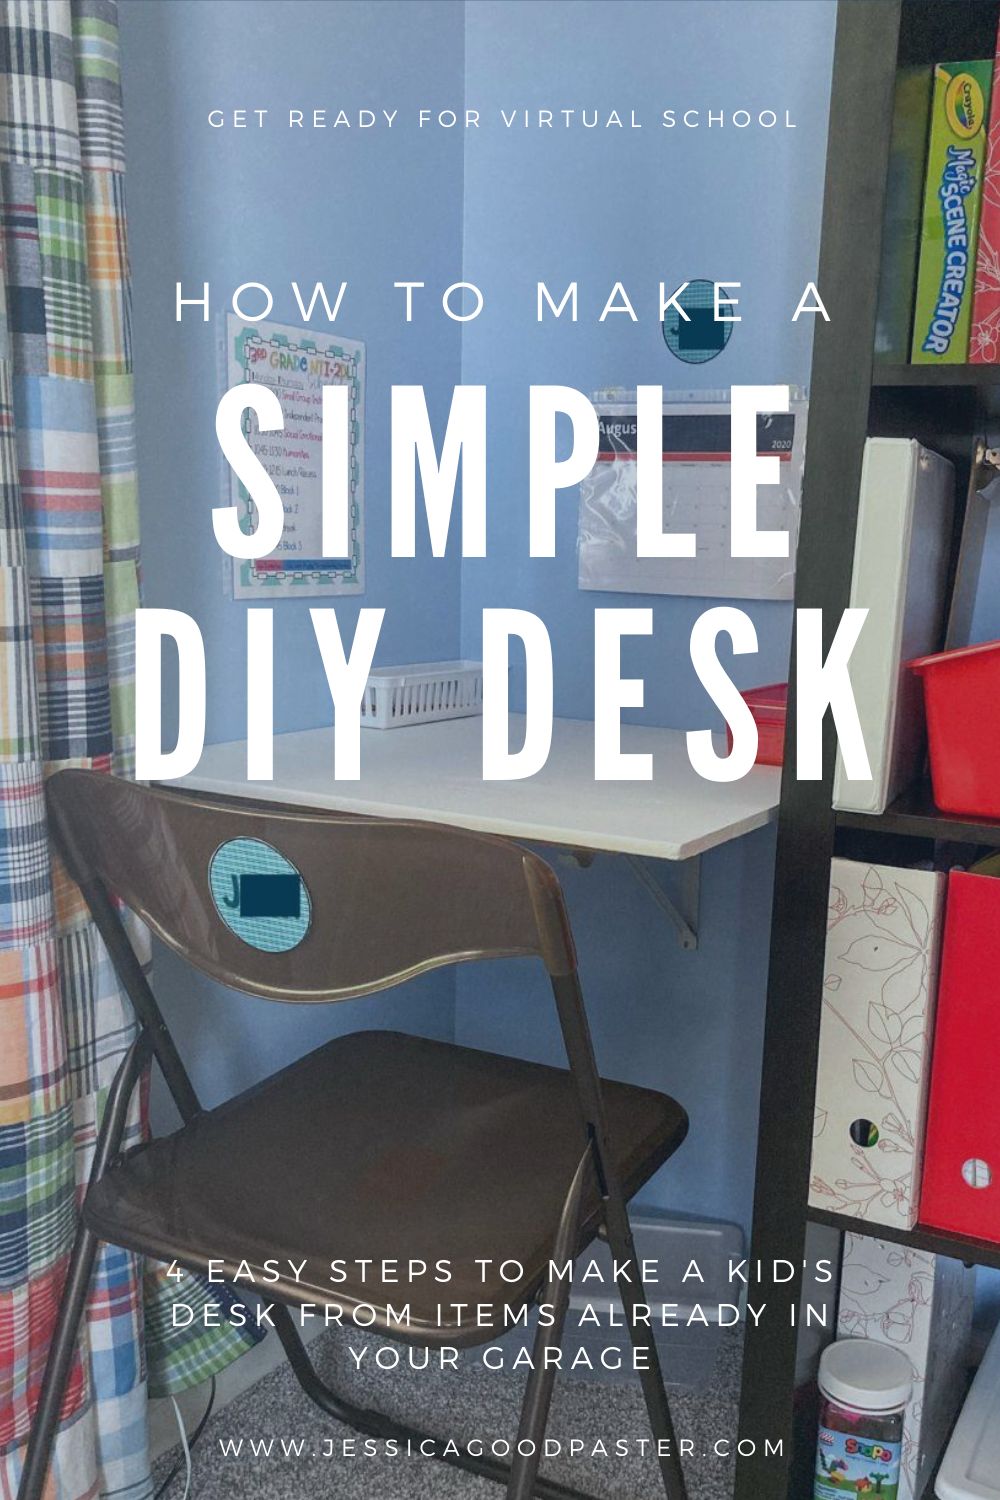 How to Make a Simple DIY Desk | Make the perfect virtual learning workspace from scratch for less than $20 with these easy instructions. This DIY desk is cheap can be used in a kid's bedroom, playroom, or office. It is great for small spaces and I made the desk from materials already in my garage in time for back to school. #backtoschool #diydesk #virtuallearning #distancelearning #homeschool #backtoschool2020